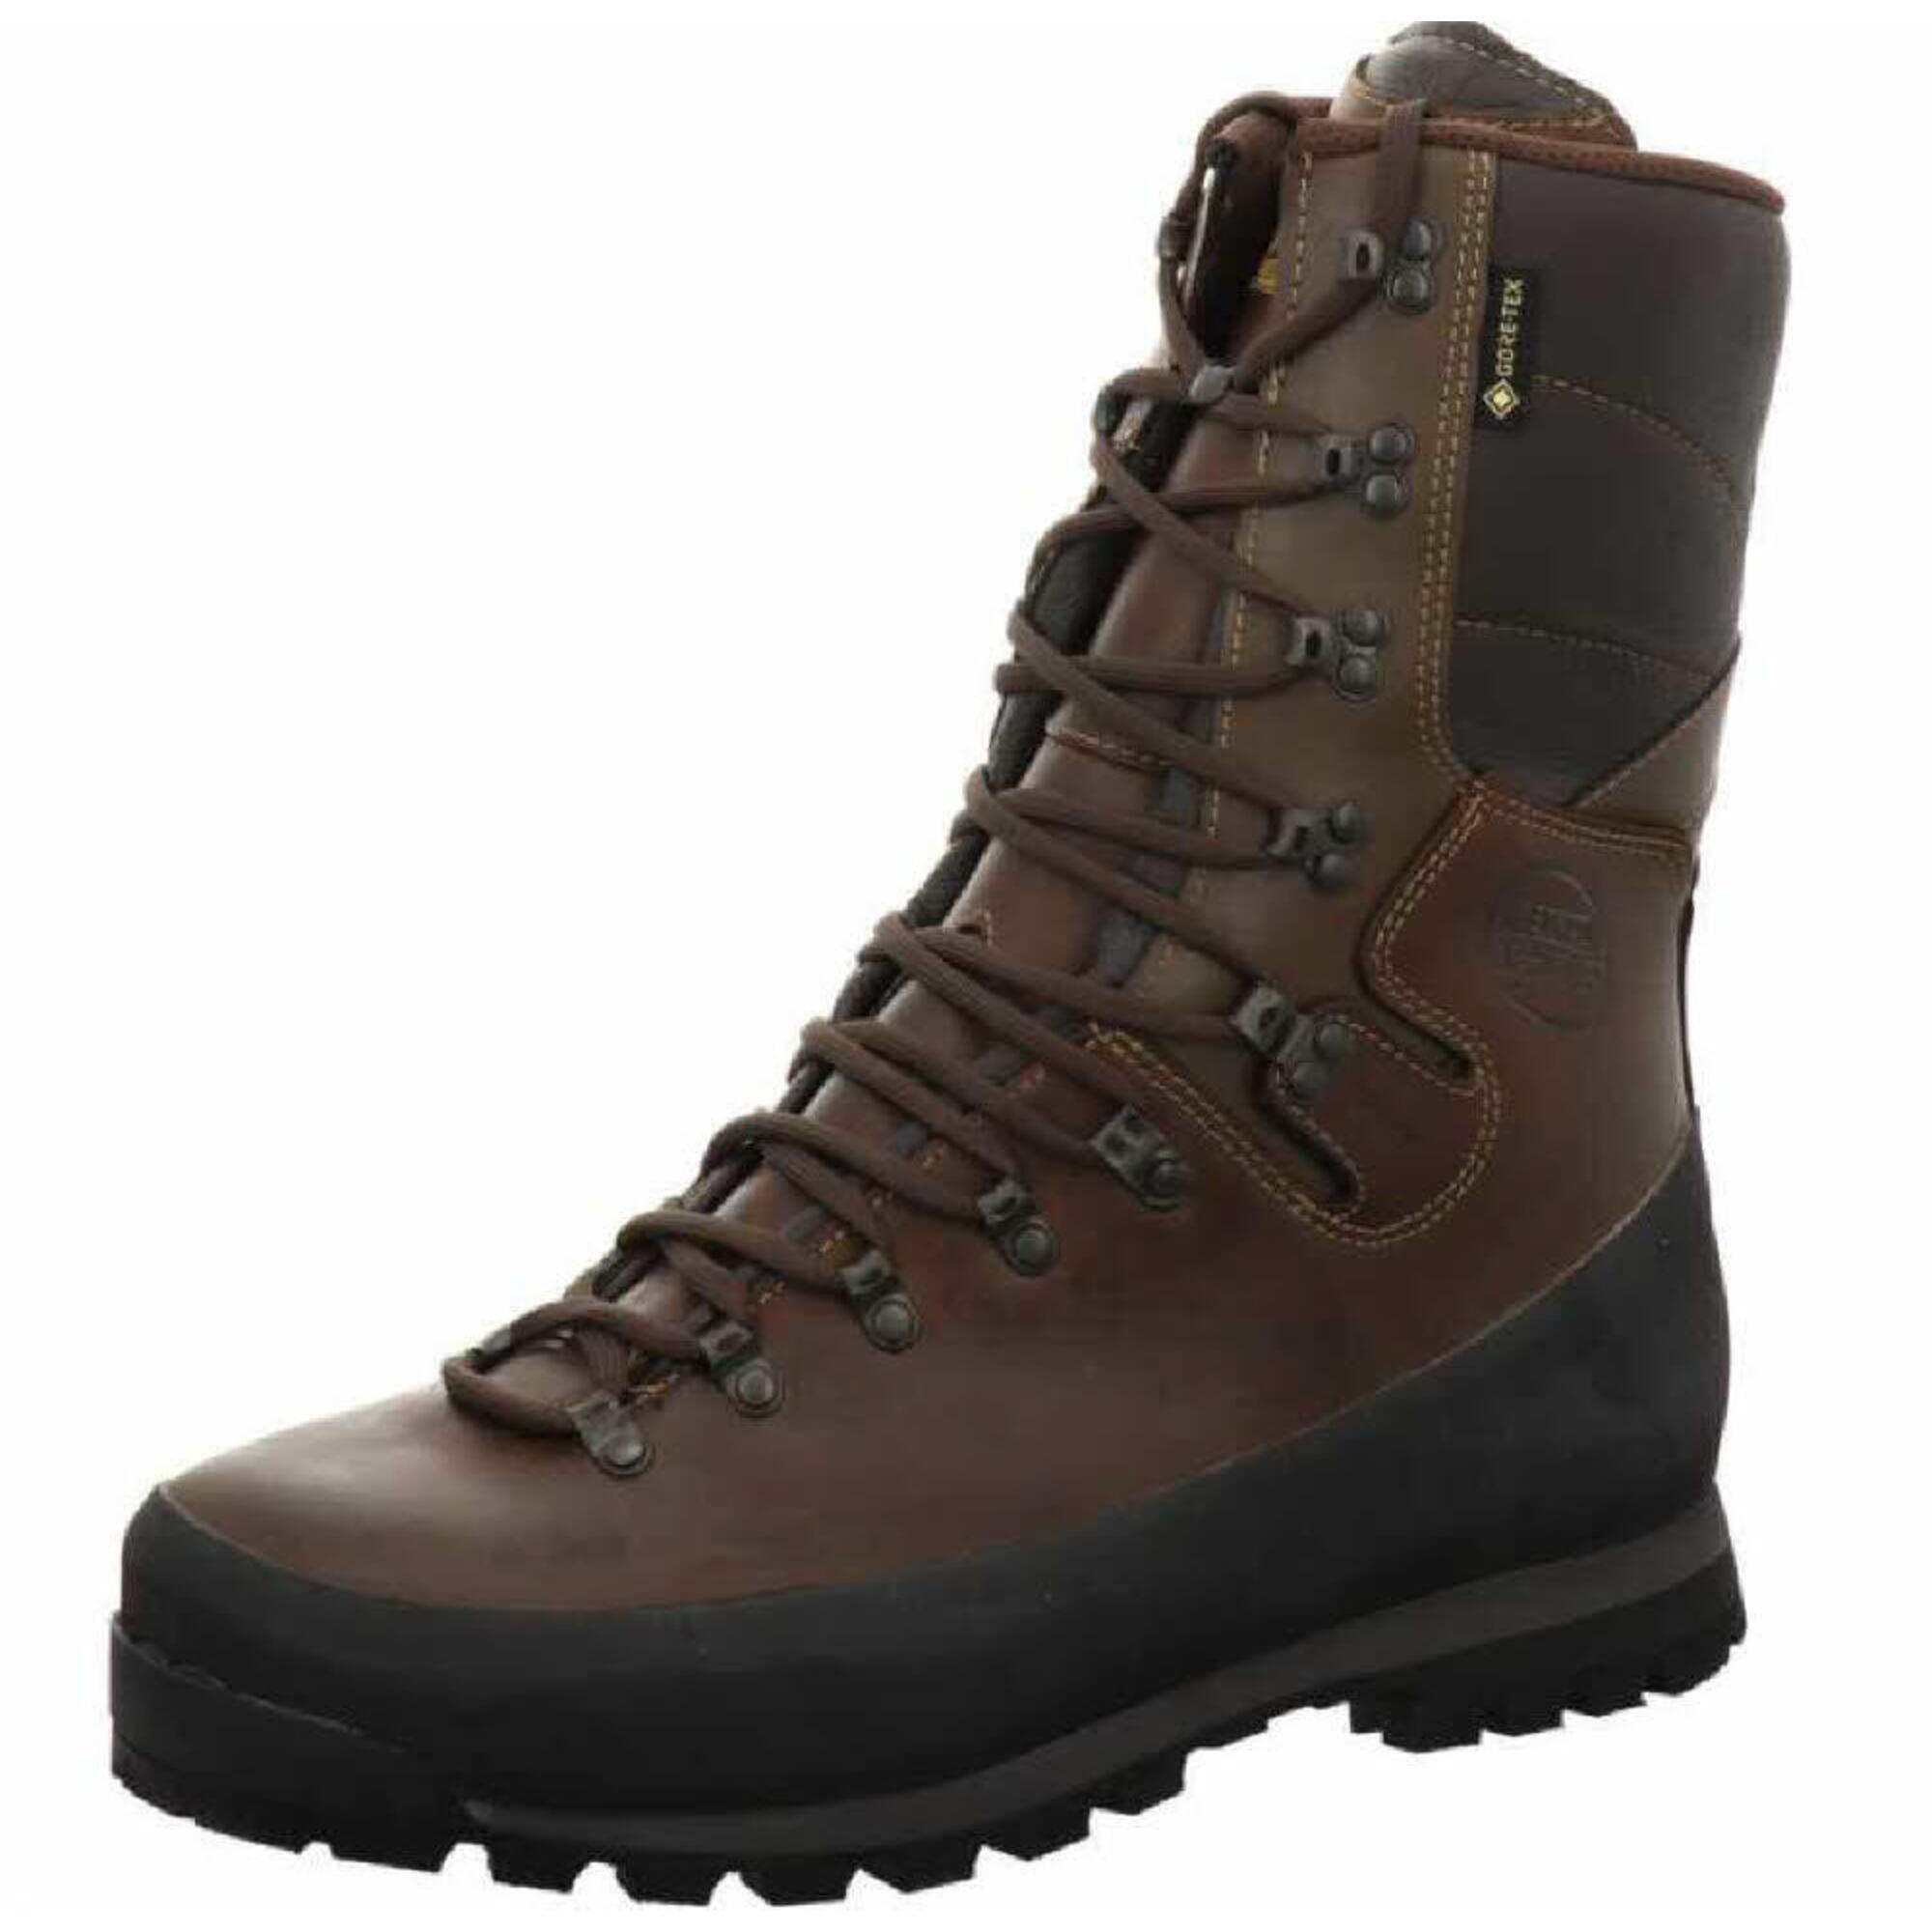 MEINDL Meindl Dovre Extreme GTX - Wide Field Boots UK 13